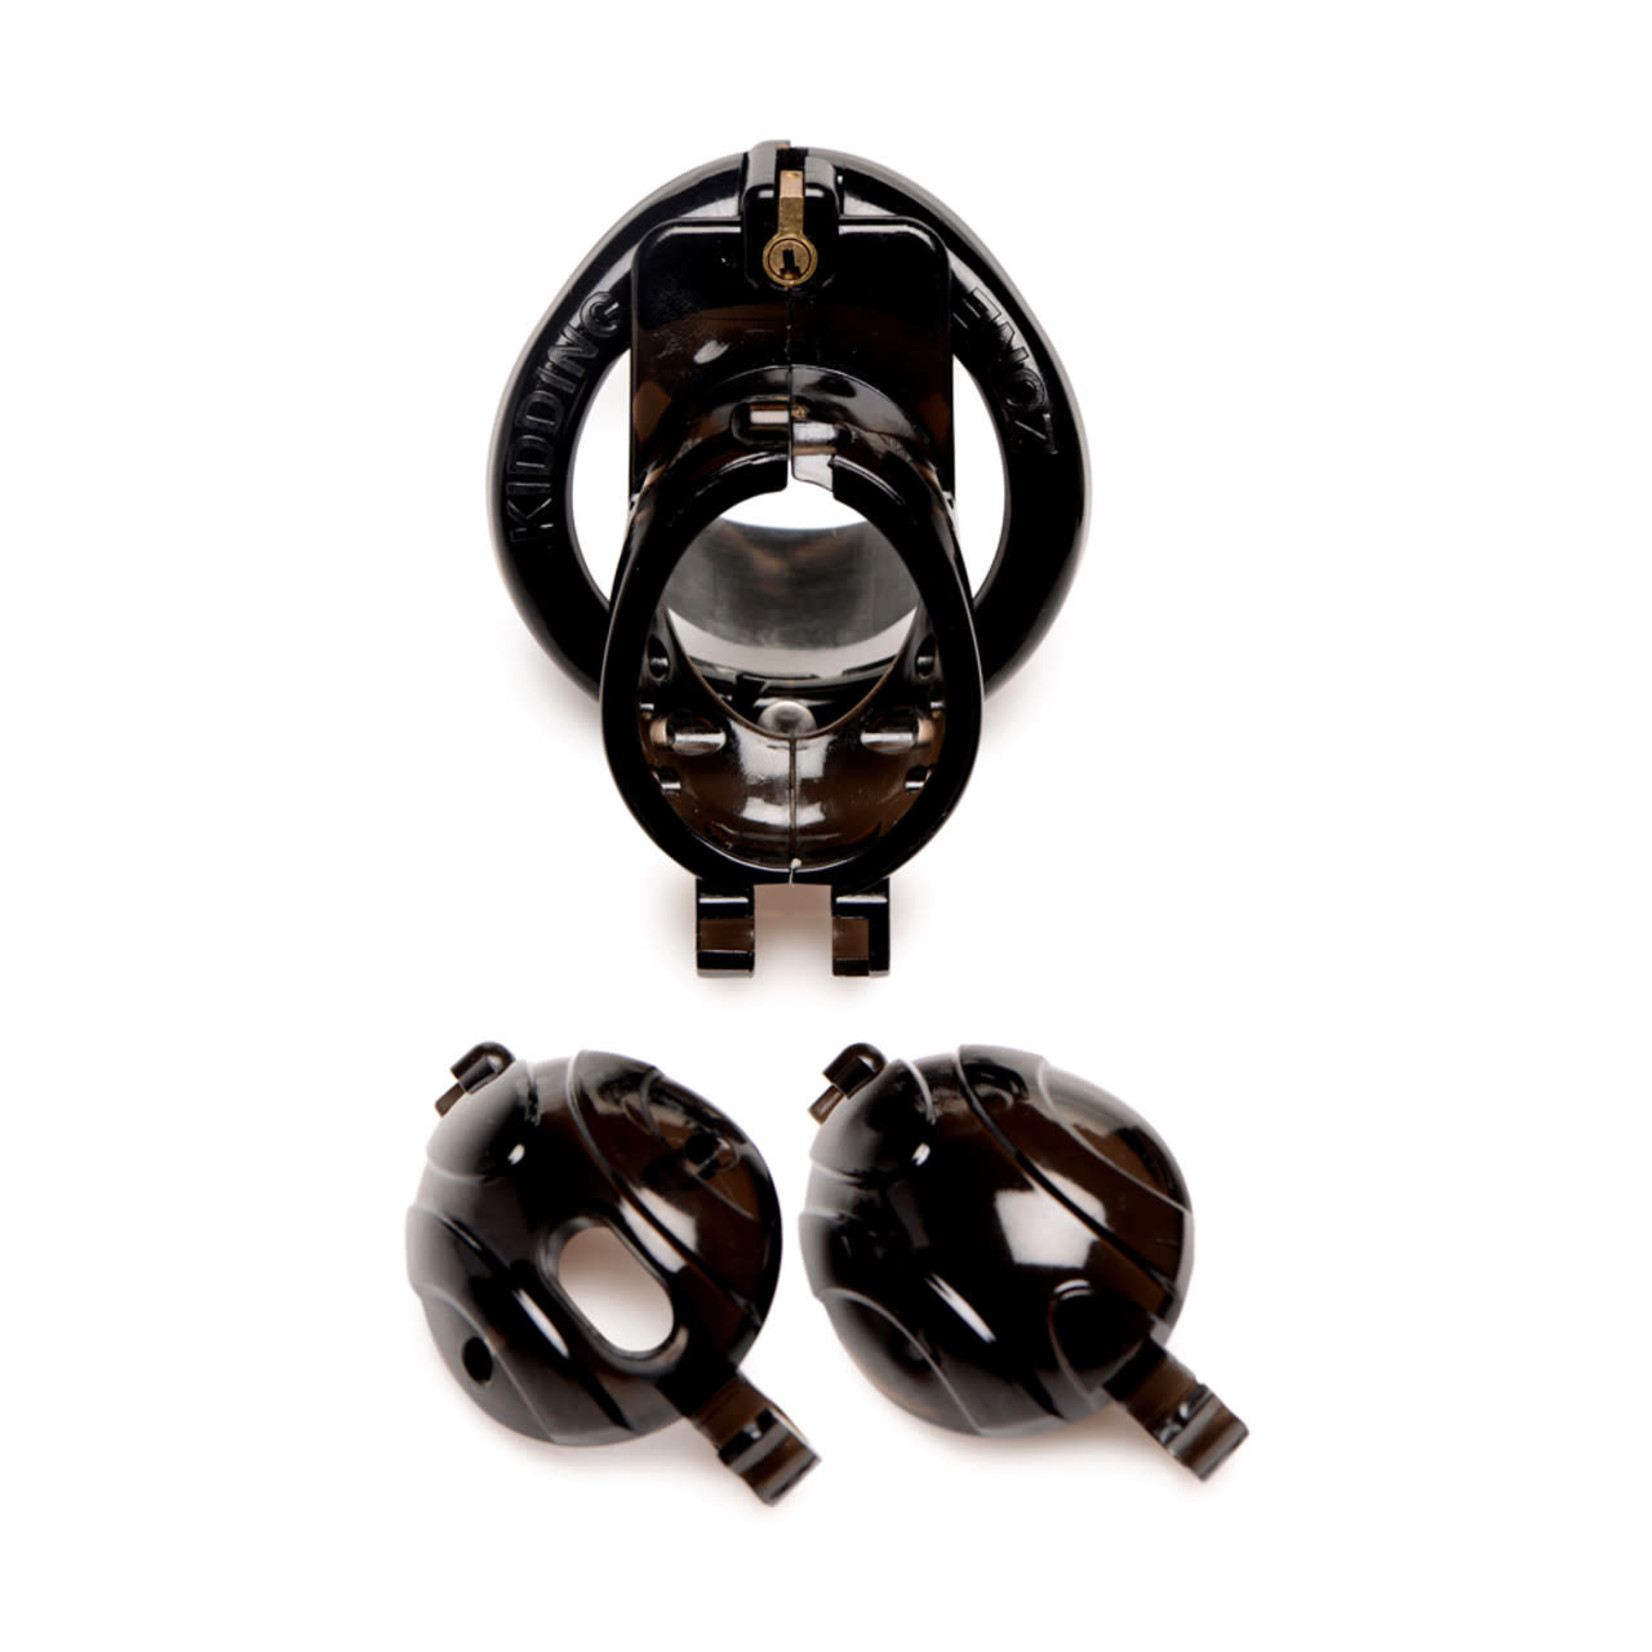 MASTER SERIES MASTER SERIES DOUBLE LOCKDOWN CHASTITY CAGE